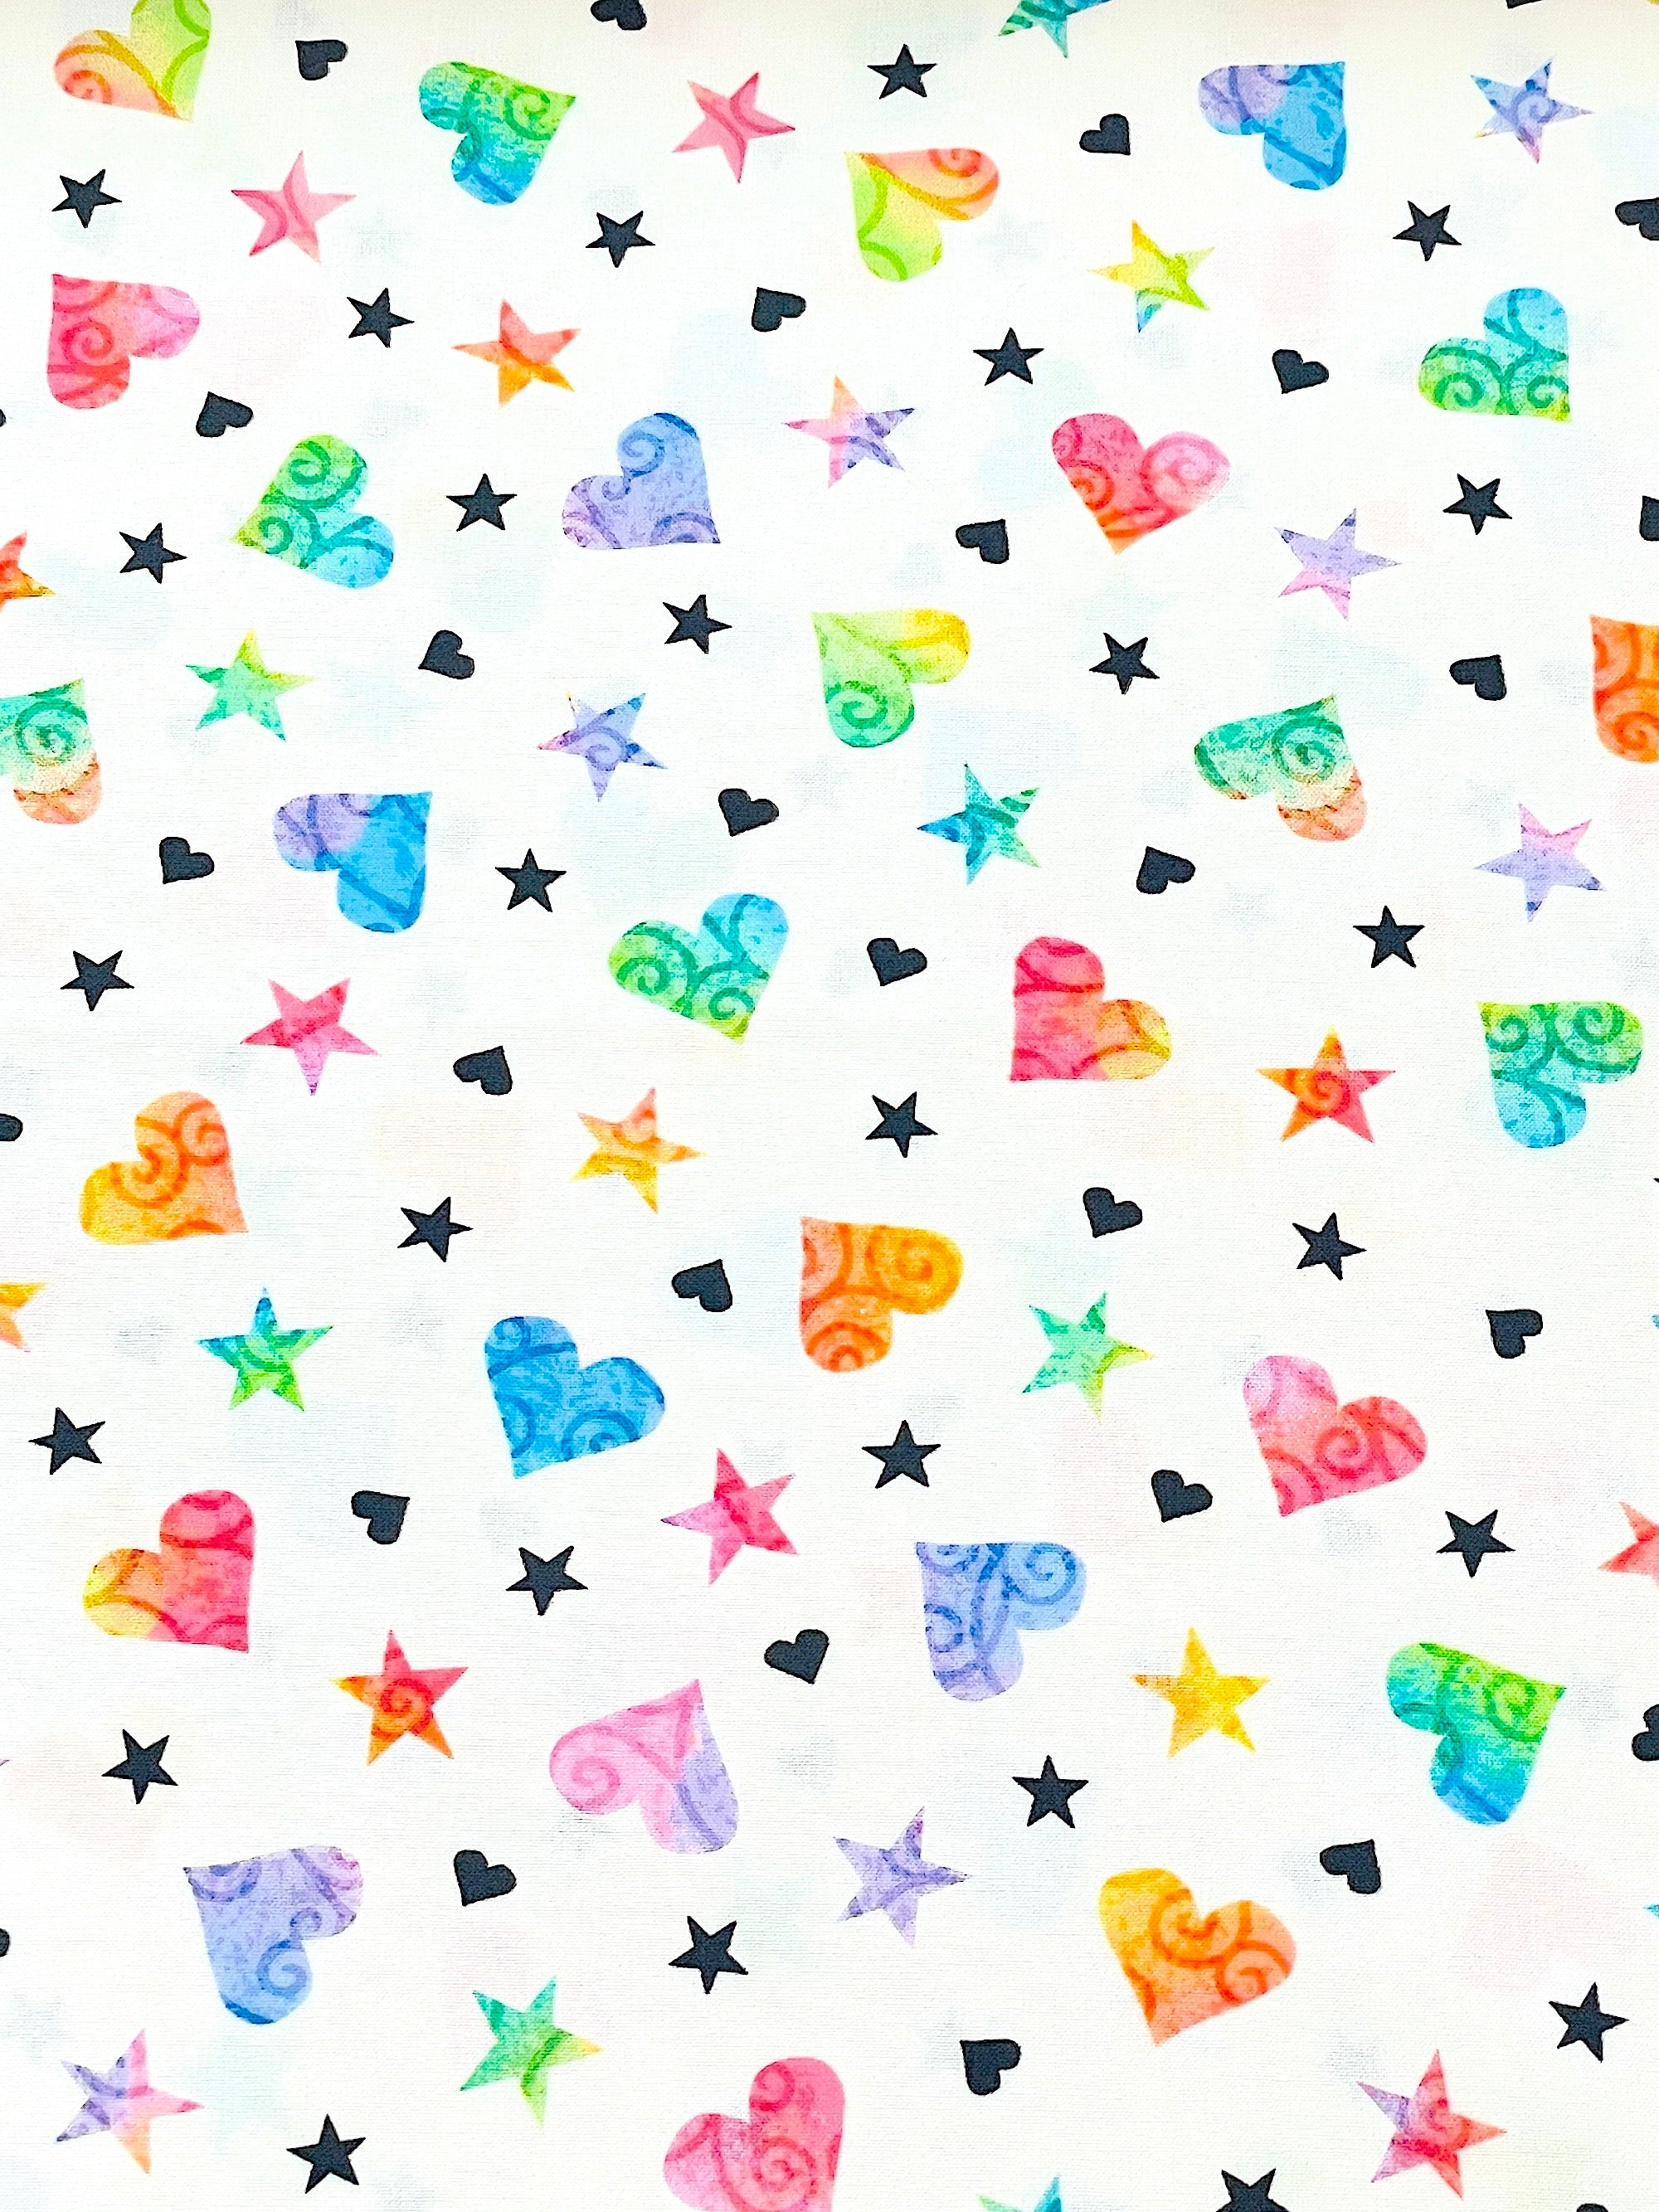 This fabric is called Be the change hearts and stars.  This white cotton fabric is covered with colorful stars and hearts.  There are purple, blue, red, yellow and green hearts and stars along with some black hearts and stars throughout the fabric.